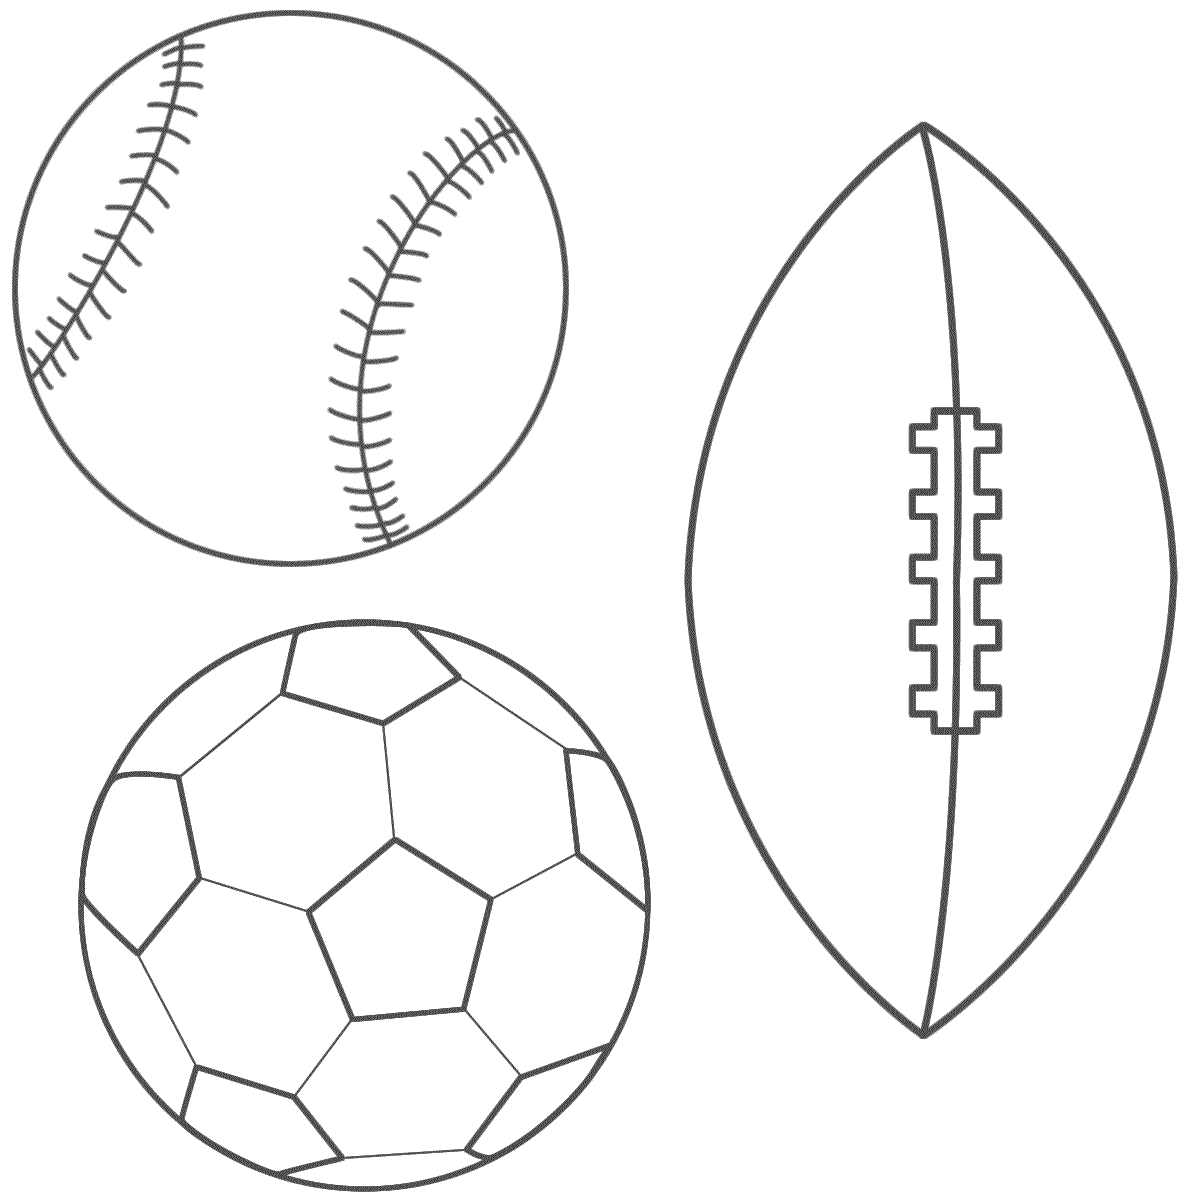 Beach ball coloring page - Coloring Pages & Pictures - IMAGIXS